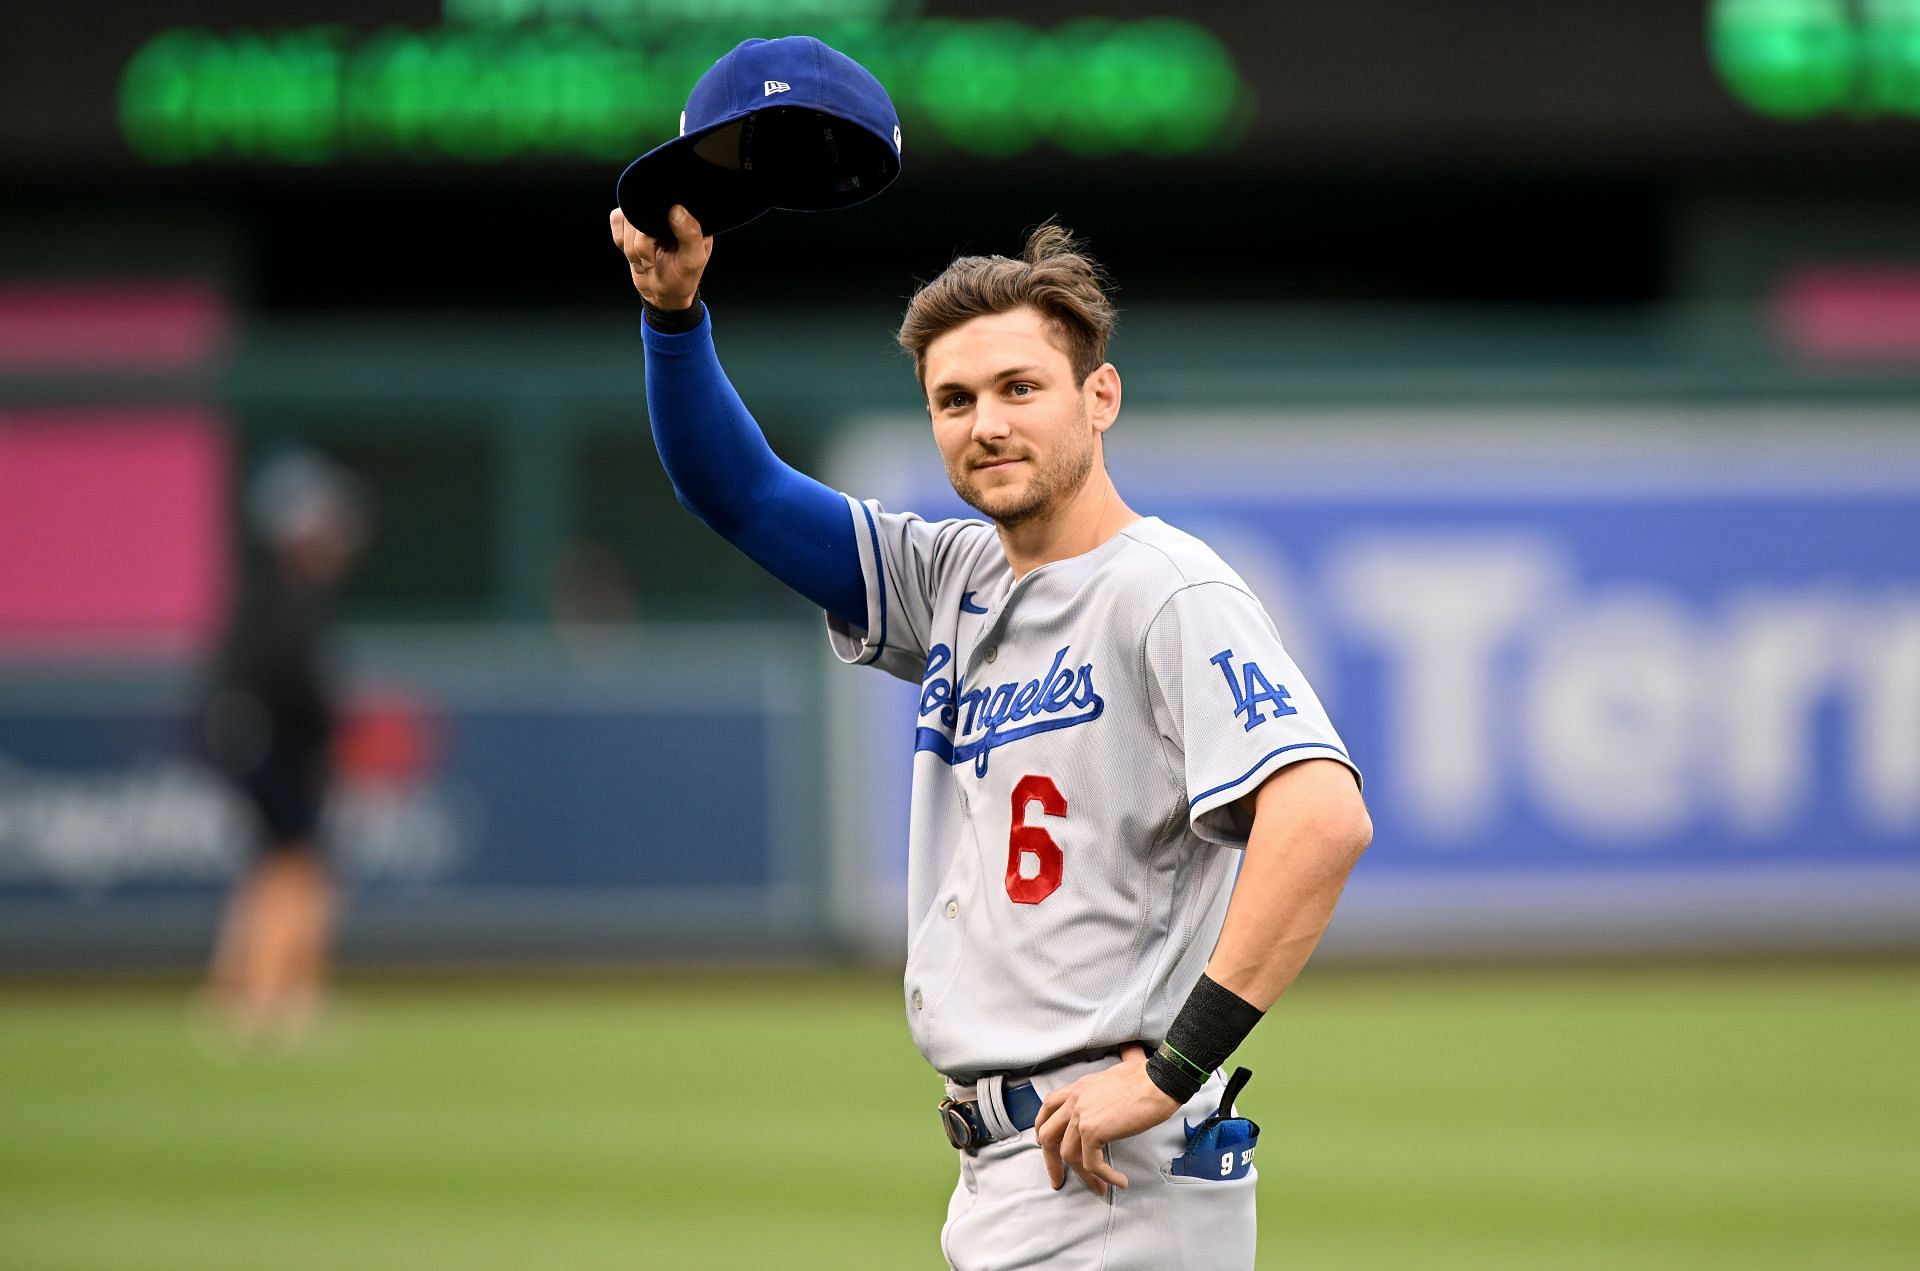 Los Angeles Dodgers shortstop Trea Turner joined the sports nurtition brand, Ladder, founded by LeBron James and Arnold Schwarzenegger.